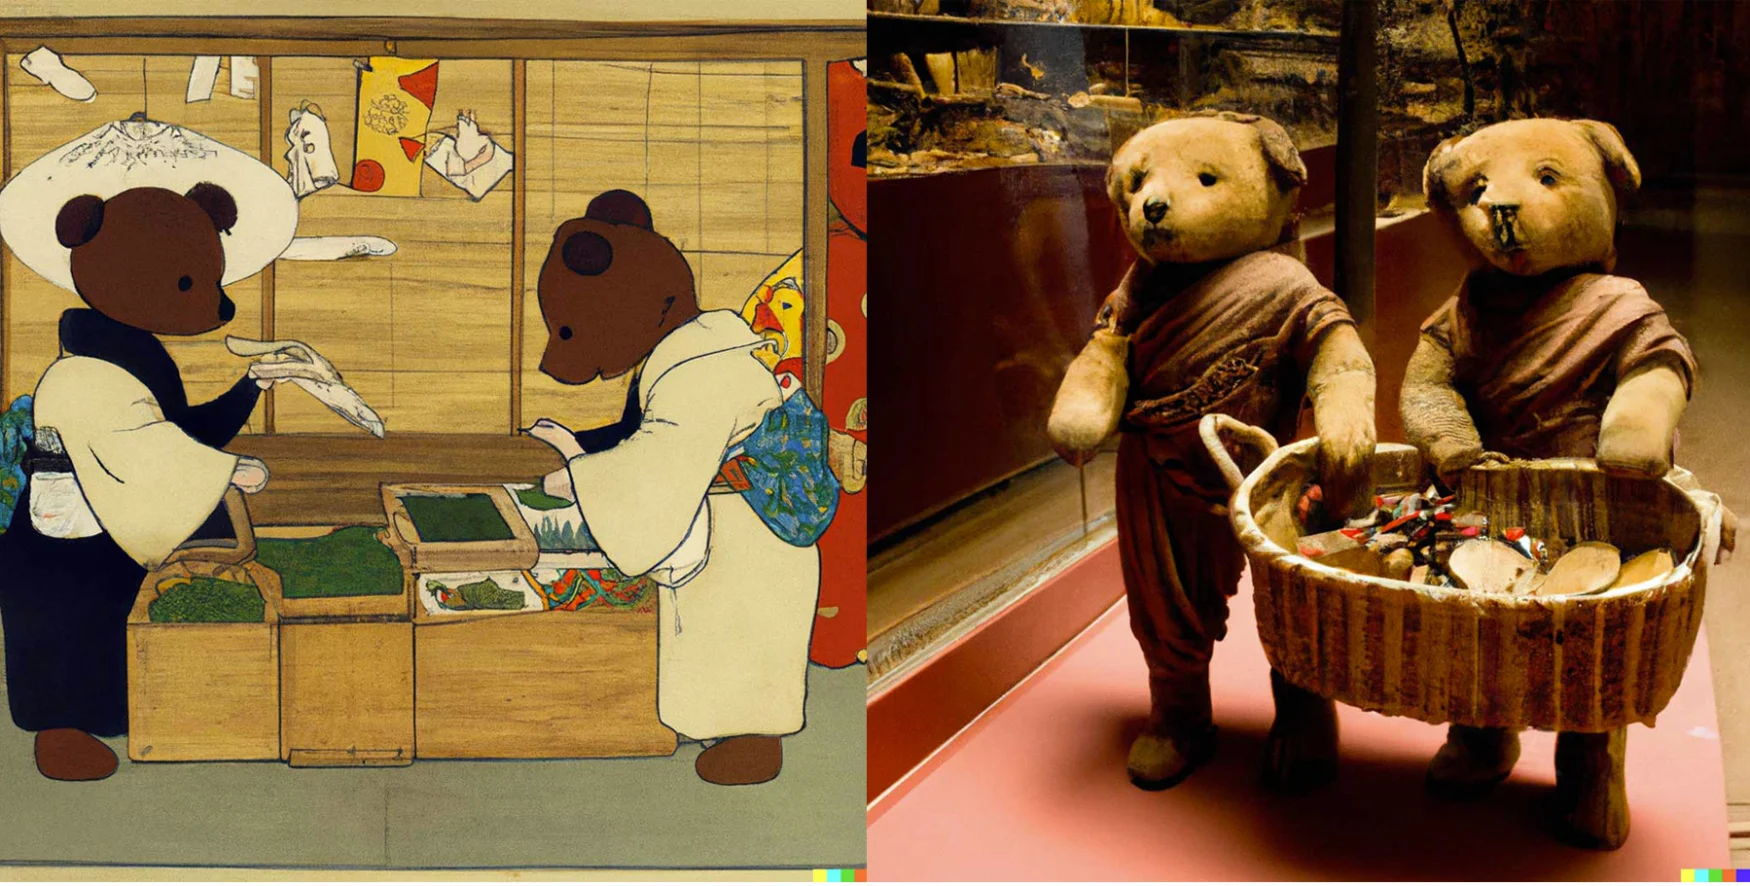 Two images of bears in different styles as produced by Generative AI system DALL-E 2.